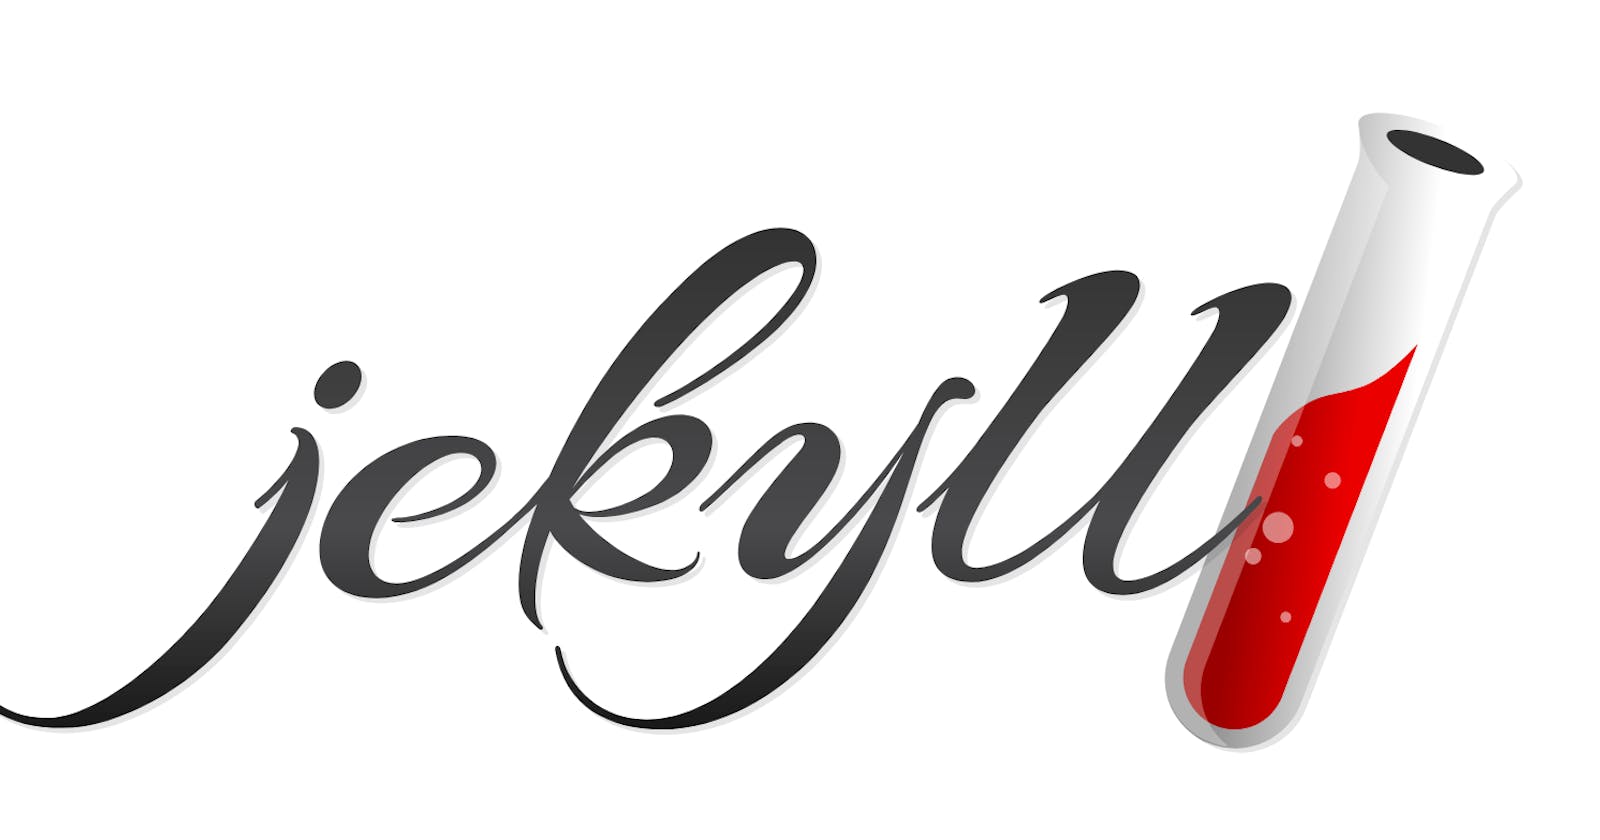 How To Get Started With Jekyll On Endless OS